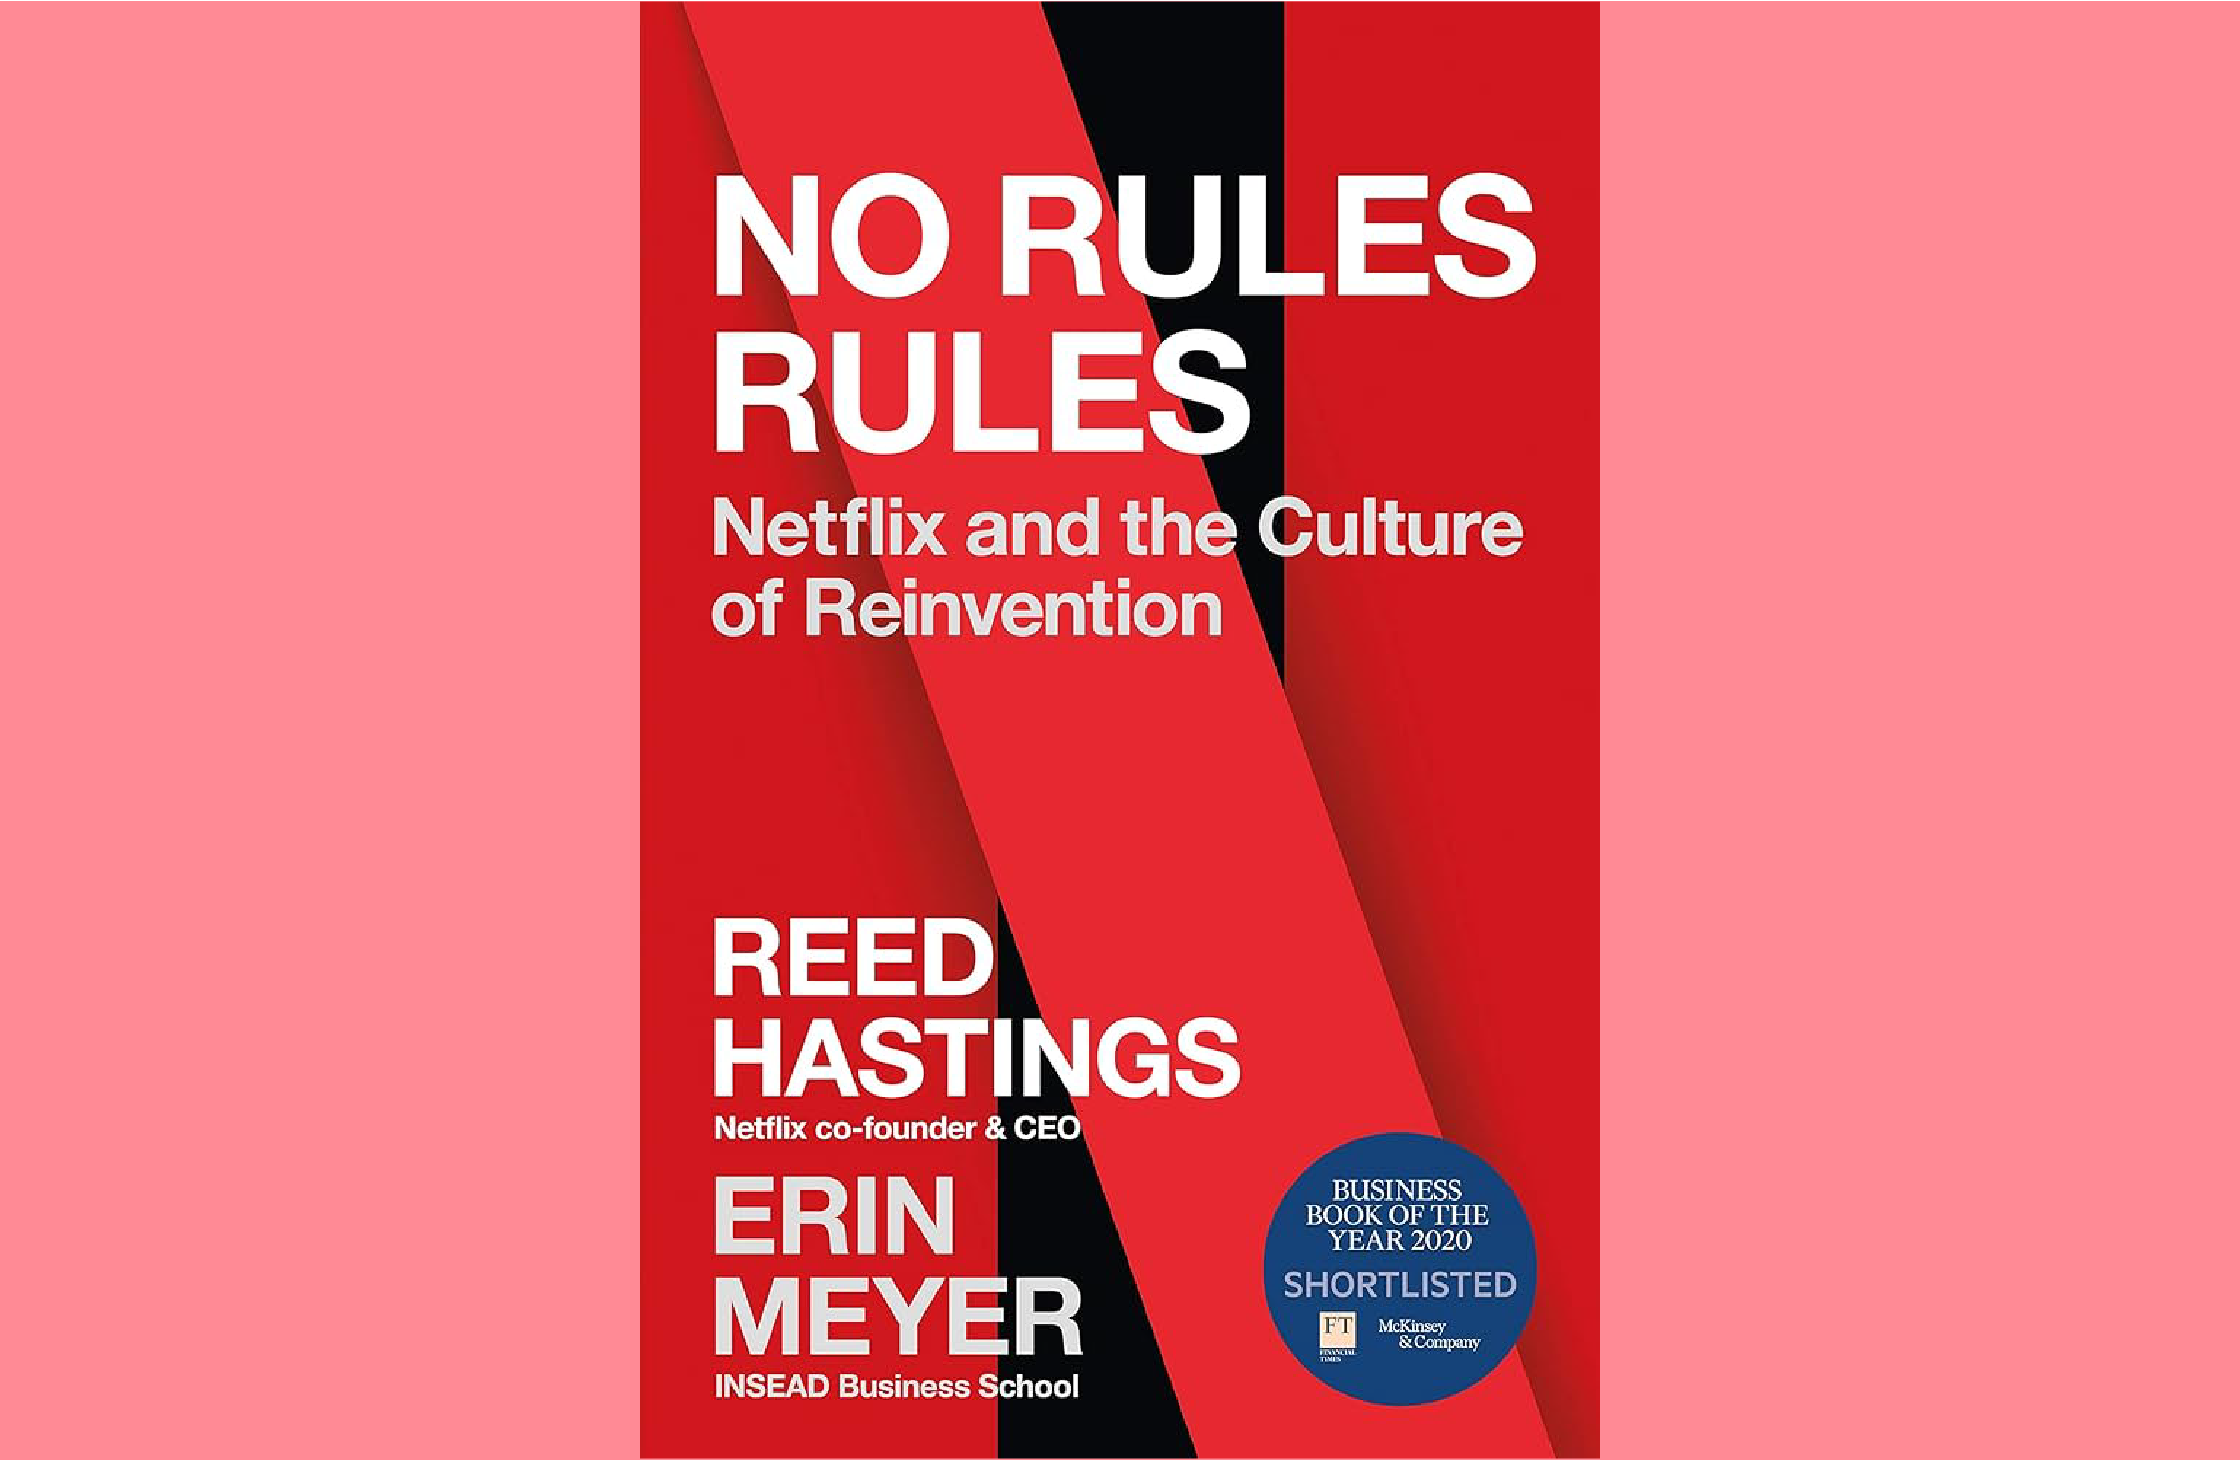 Summary: No Rules Rules: Netflix and the Culture of Reinvention by Reed Hastings and Erin Meyer